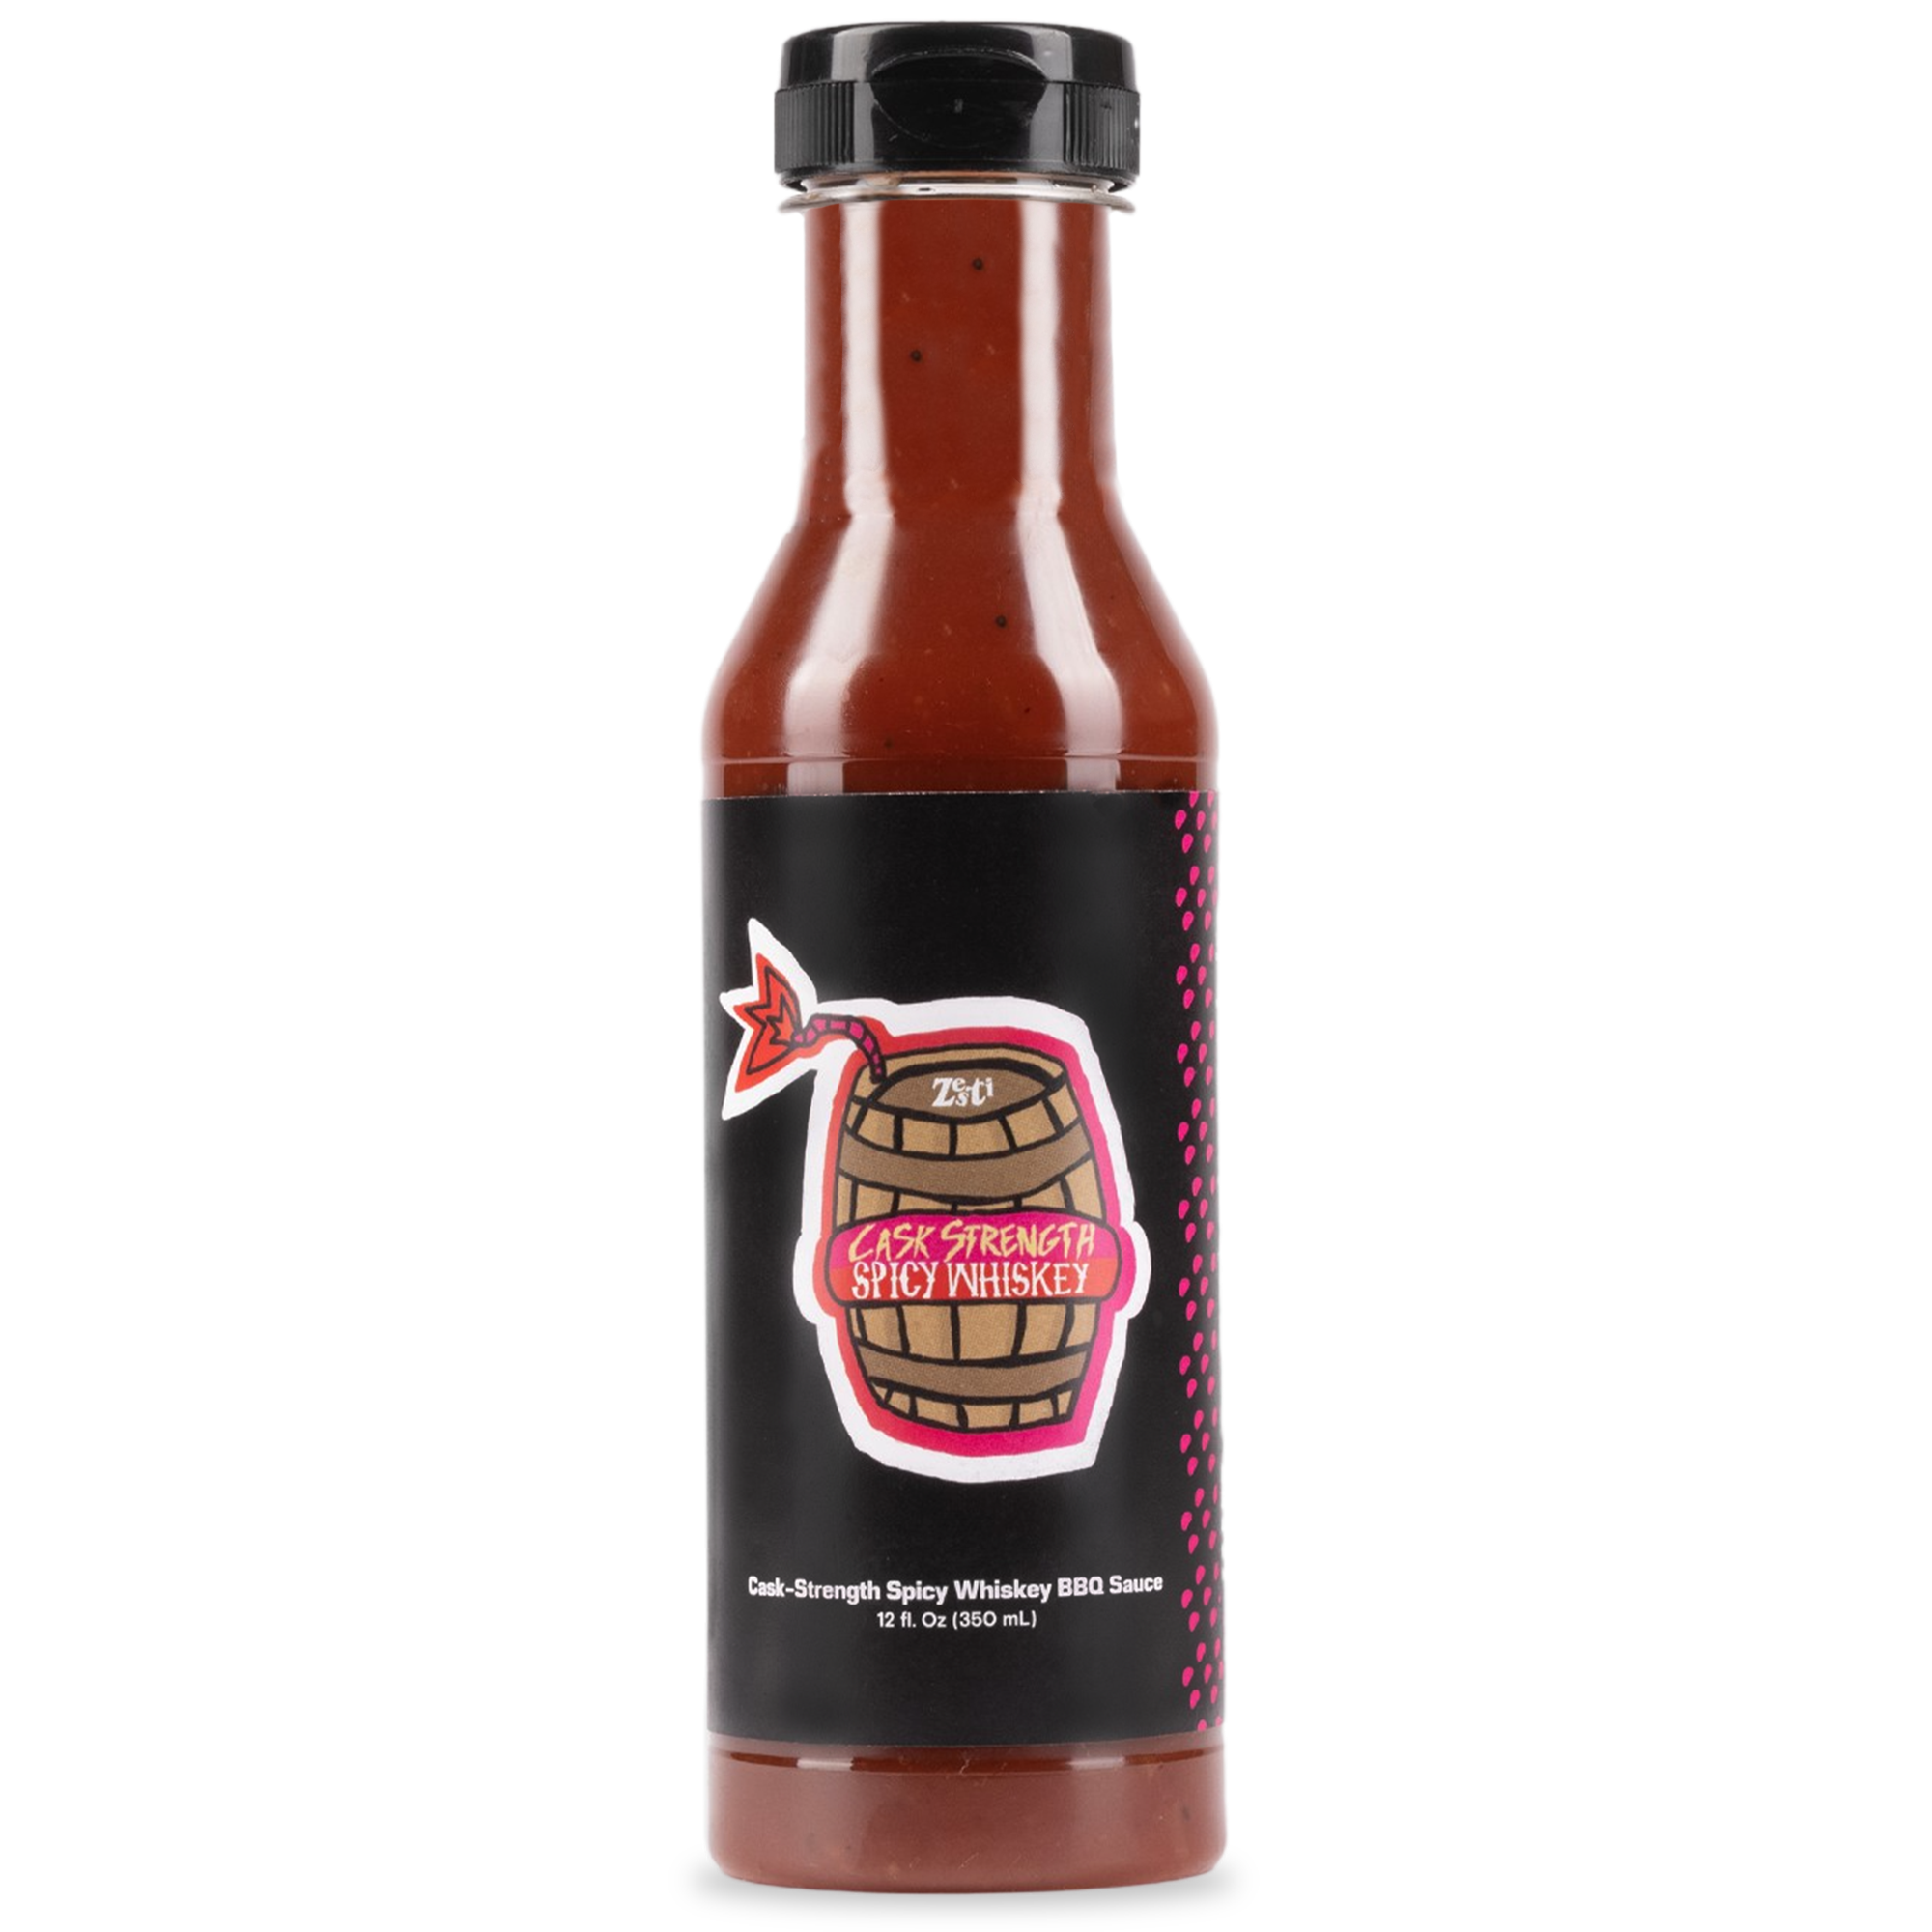 https://cdn.shopify.com/s/files/1/0543/1551/6073/products/Zesti-Cask-Strength-Spicy-Whiskey-BBQ-Sauce_2000x.png?v=1619708237